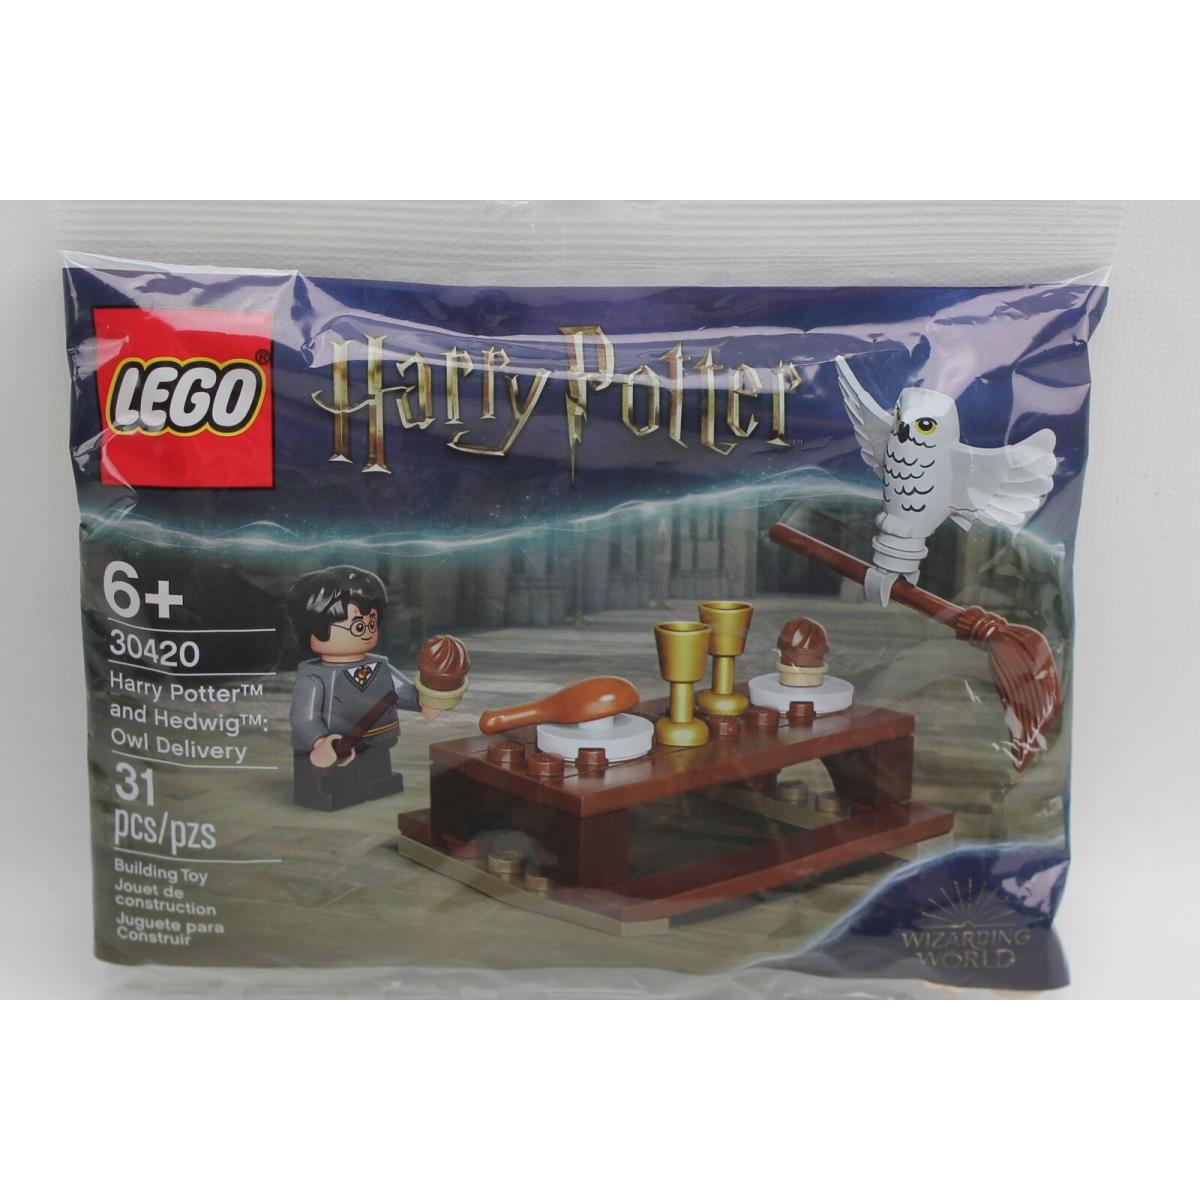 Lego Harry Potter and Hedwig Owl Delivery Set 30420